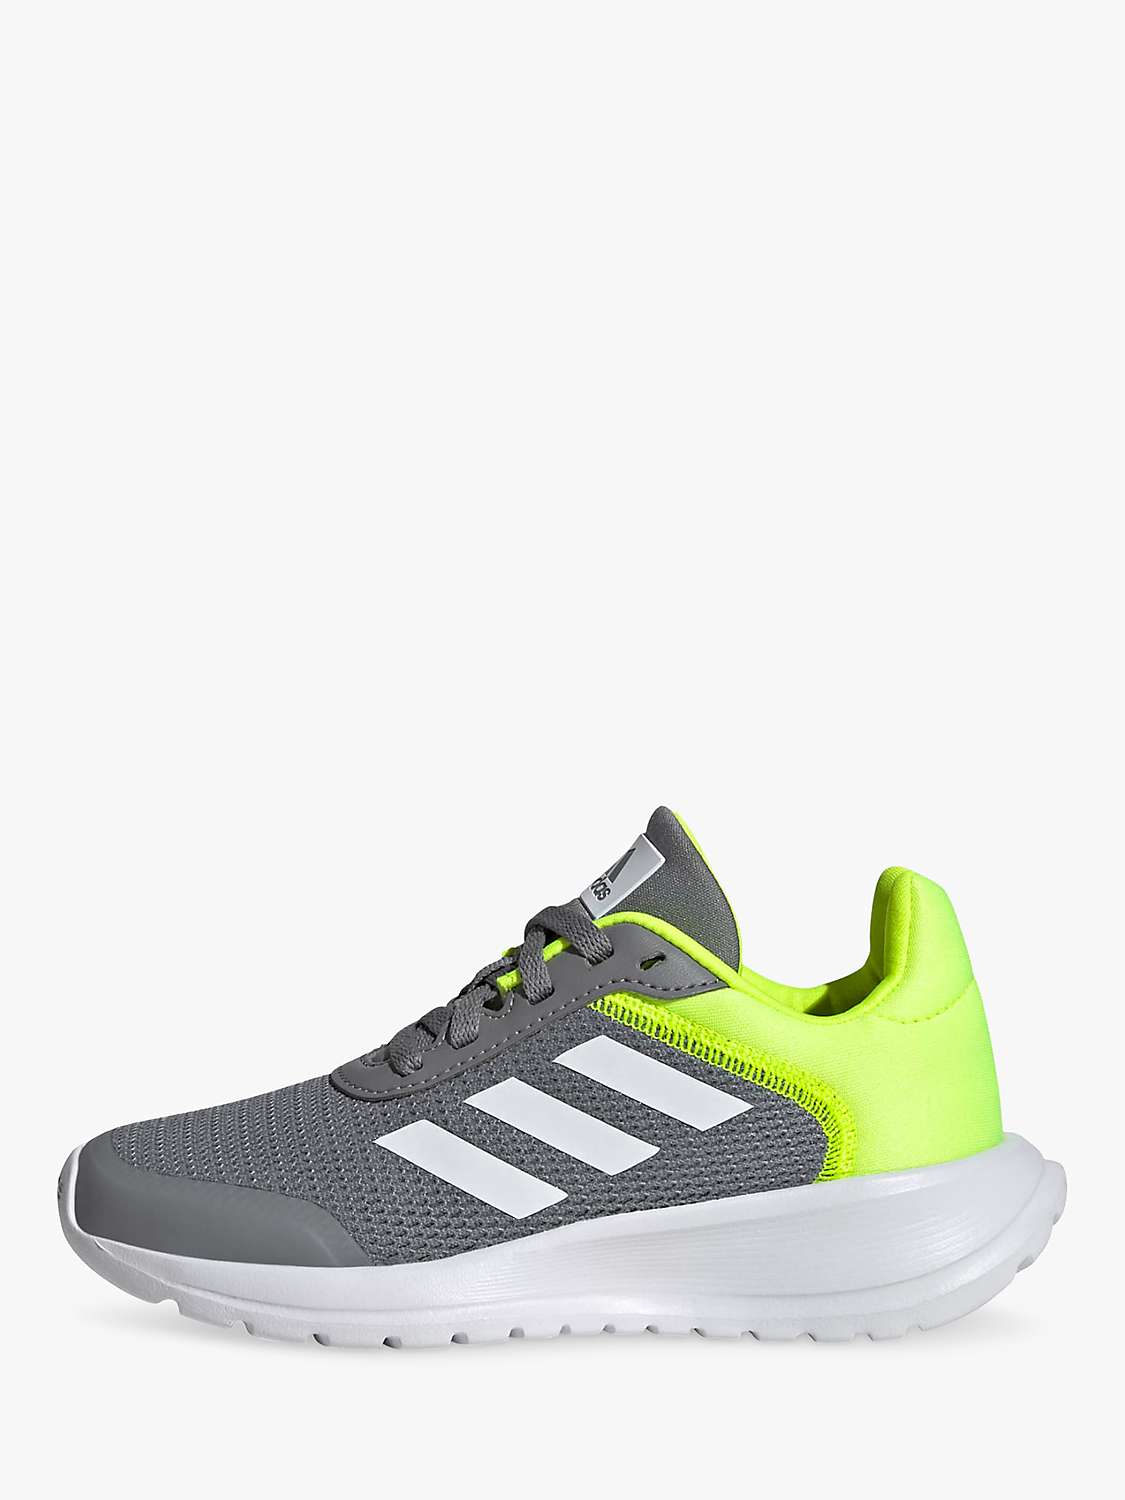 Buy adidas Kids' Tensaur Run 2.0 Lace Up Trainers, Grey/Green Online at johnlewis.com